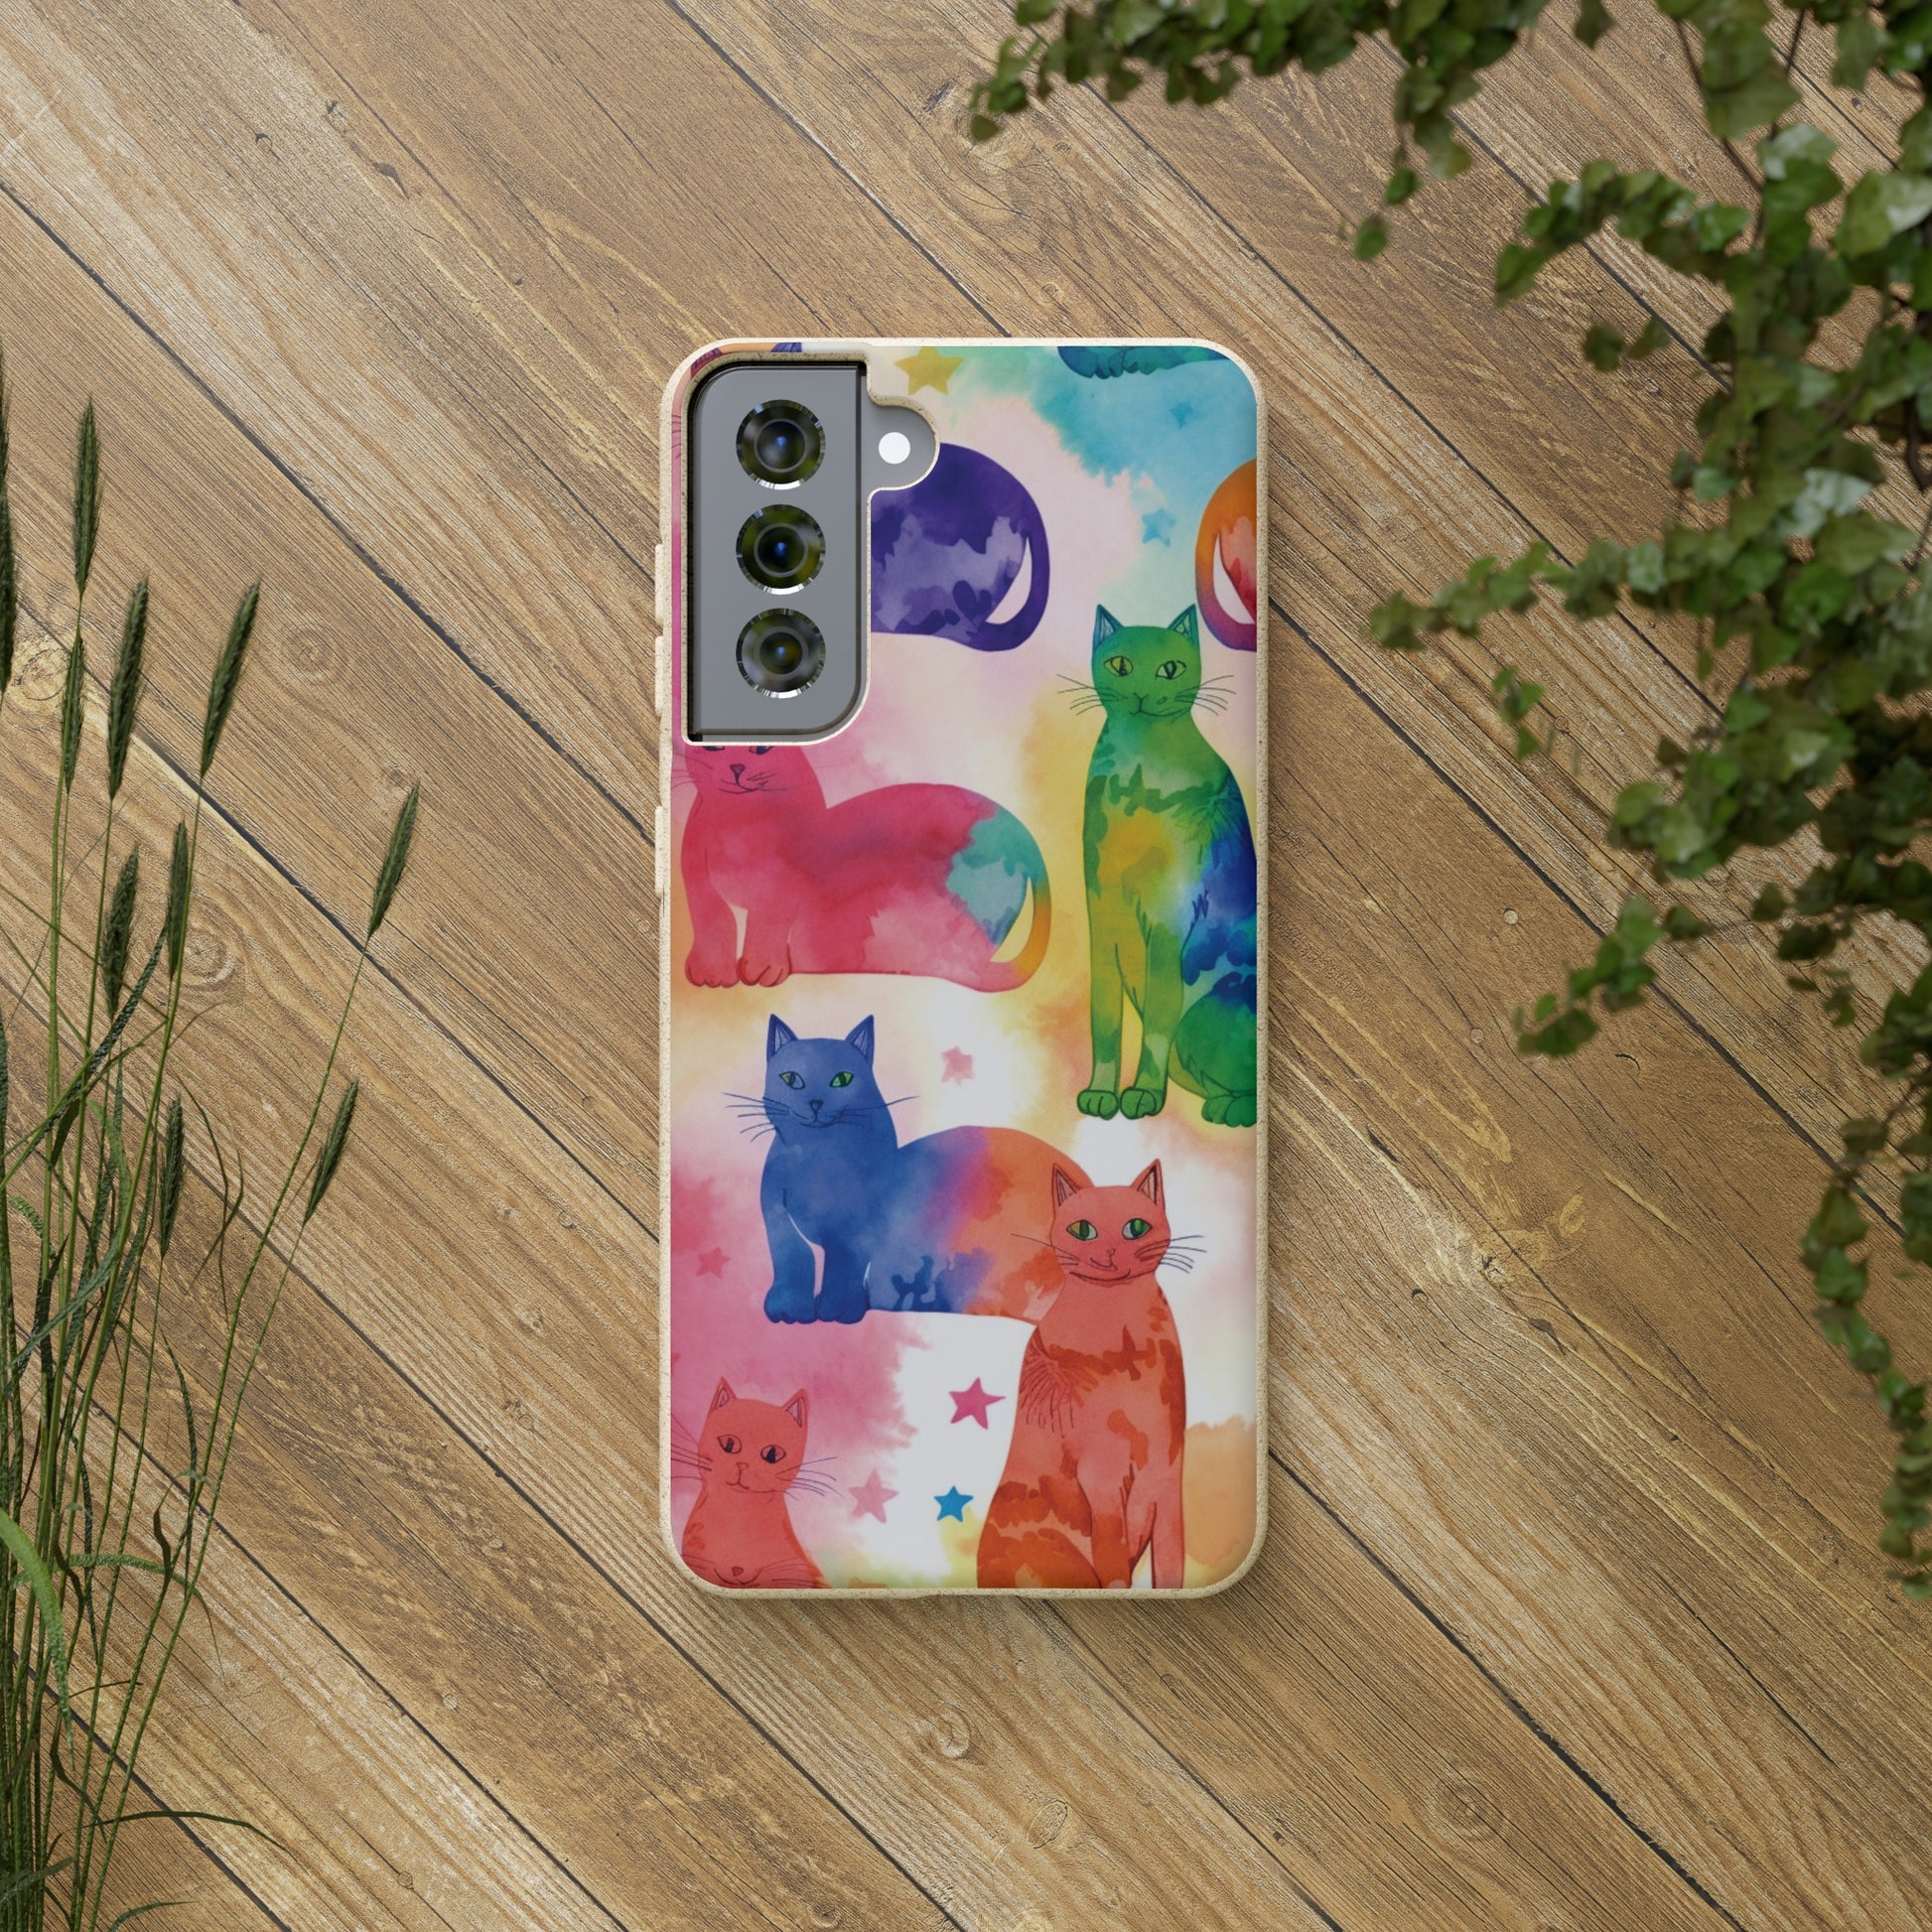 The Tie-Dye Cat Biodegradable Phone Case